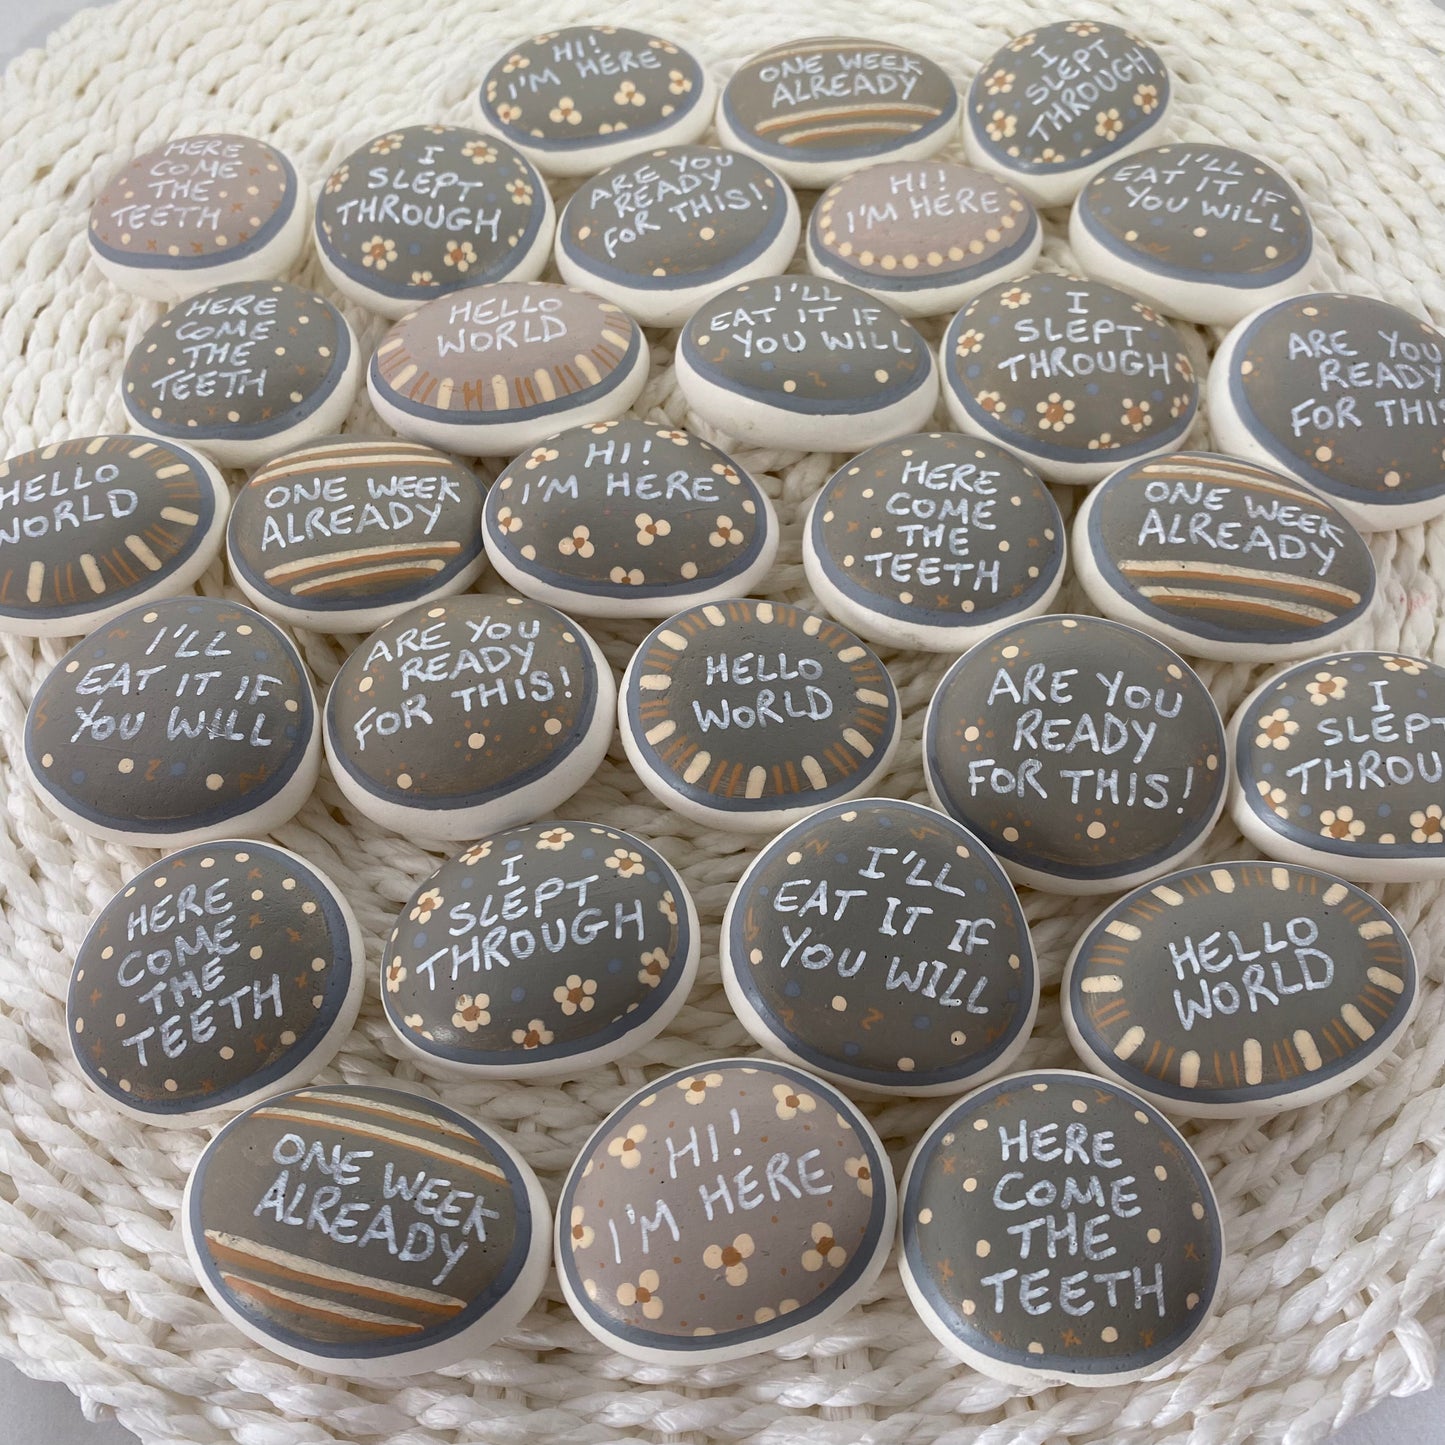 Lots of Neutral Coloured Hand painted pebbles with Baby Milestone words written on